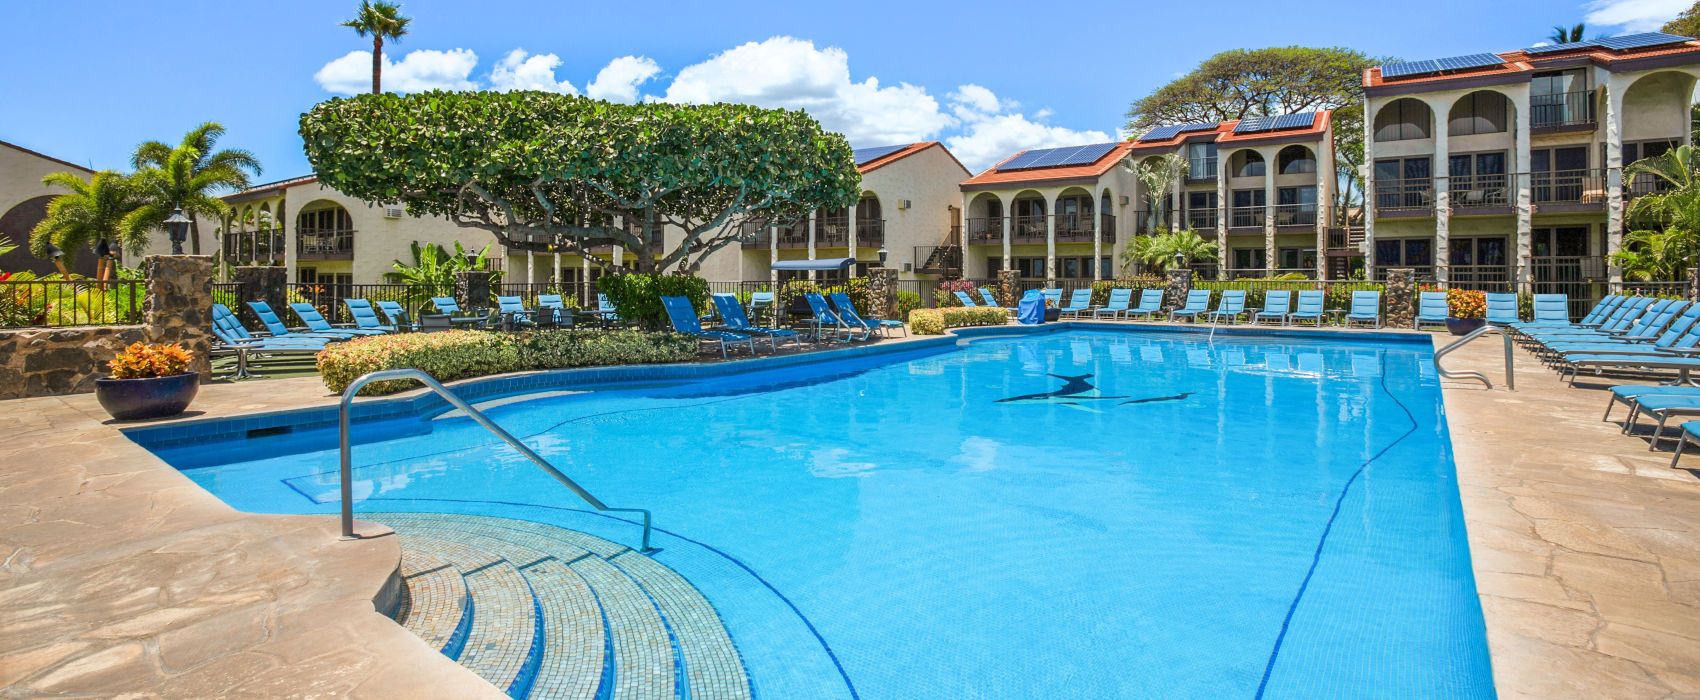 Aston Maui Hill pool with signature whale at the bottom of the pool, blue lounge chair seating around the pool deck, lush trees, bushes and grassy lawn, under the blue sky and view of the blue ocean behind.